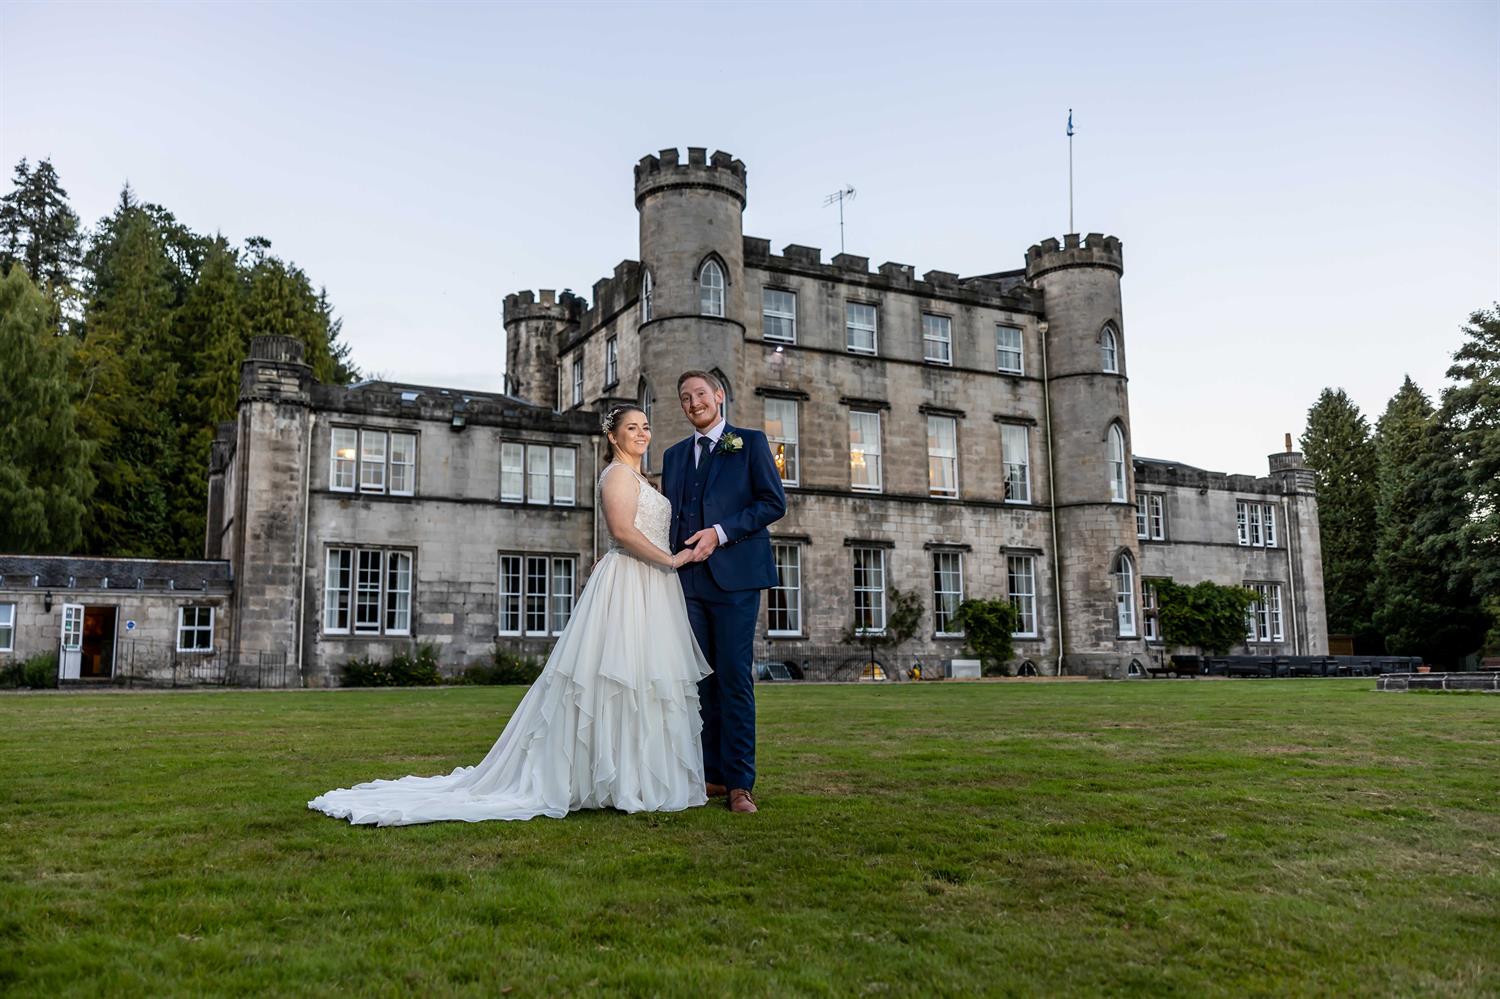 Bride and groom in front of a castle